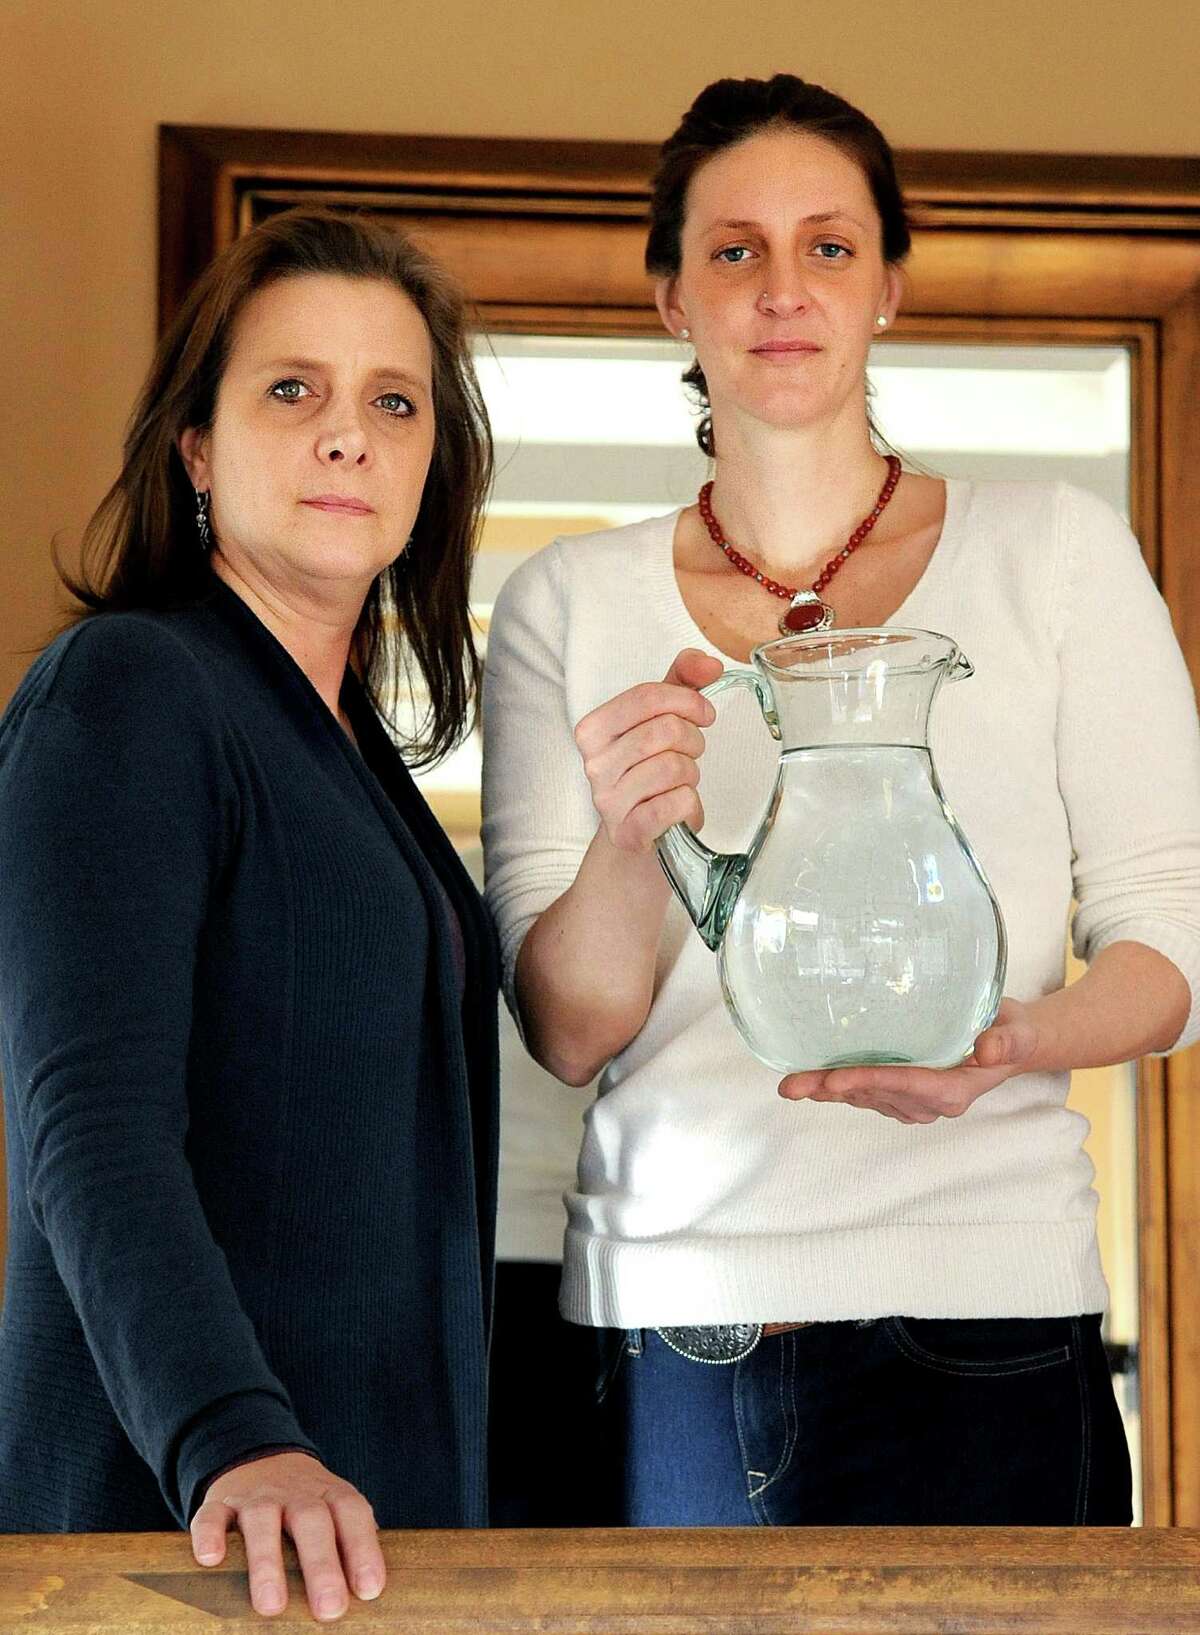 Jessica Penna holds a pitcher of water as she stands with her sister, Michelle Babyak, in Penna's Weston home on Thursday, January 31, 2013. Penna's home has well-water which is contaminated with arsenic which Penna believes has caused her health problems. Babyak, of Newtown, has radon in her well water.